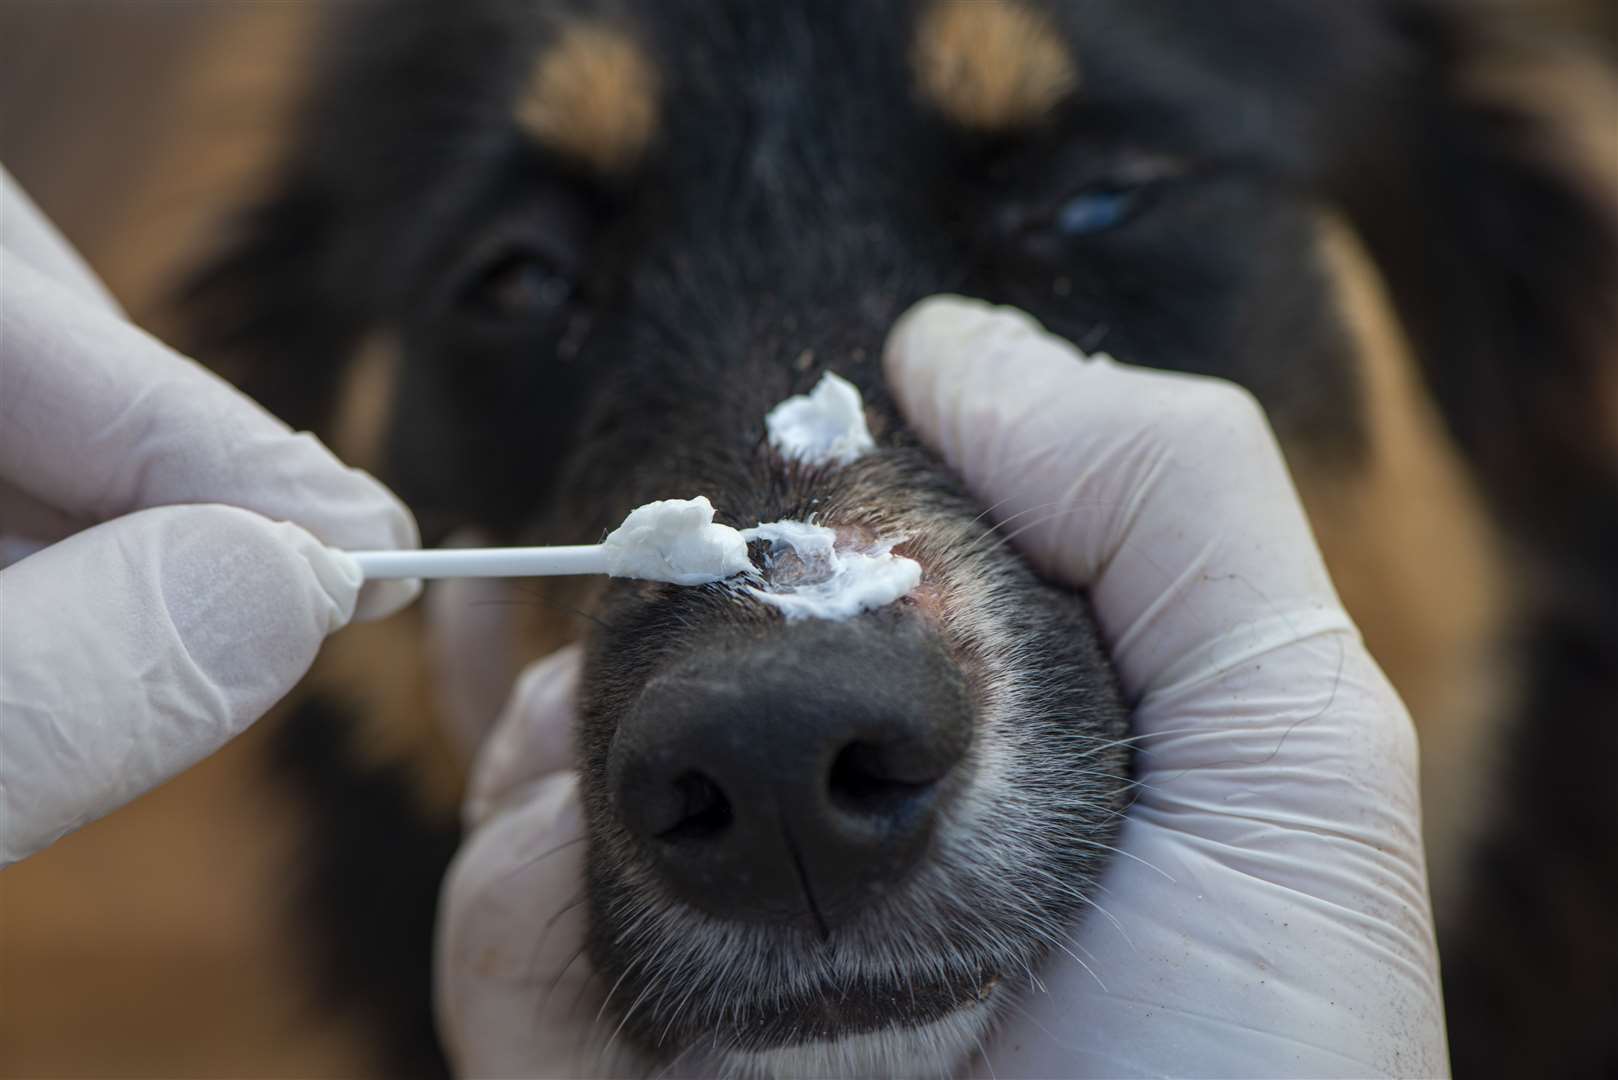 A dog getting ringworm treatment on his nose. Credit: istock/RusianDashinsky